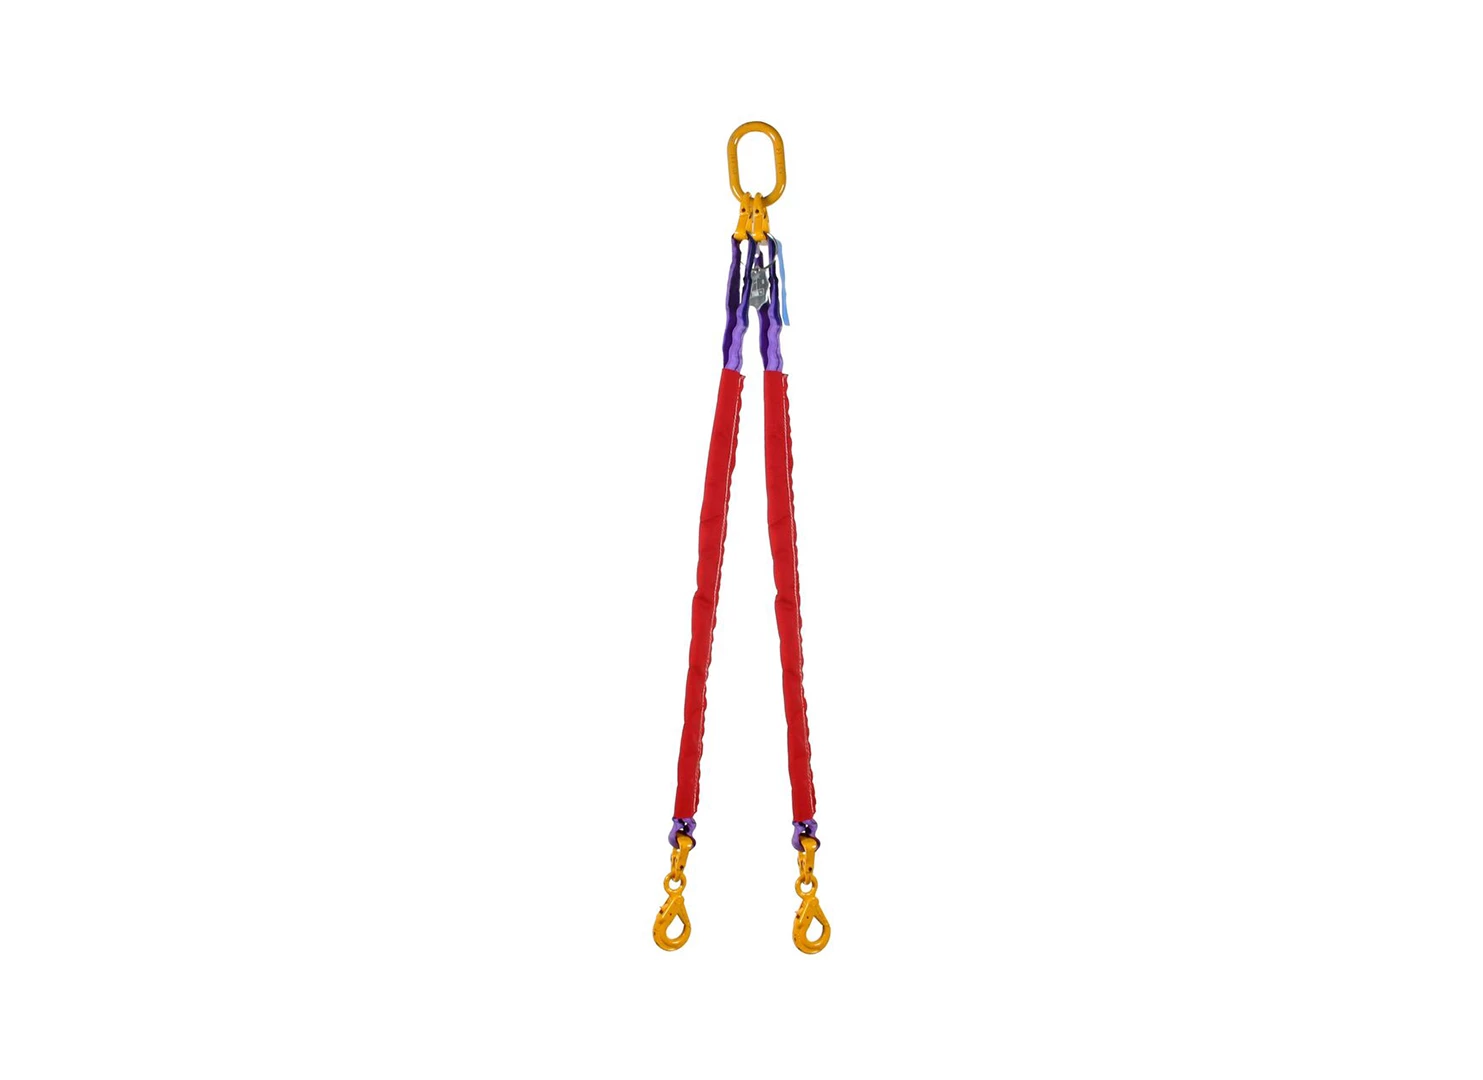 Product: Round slings 4 4.2t*2,3m